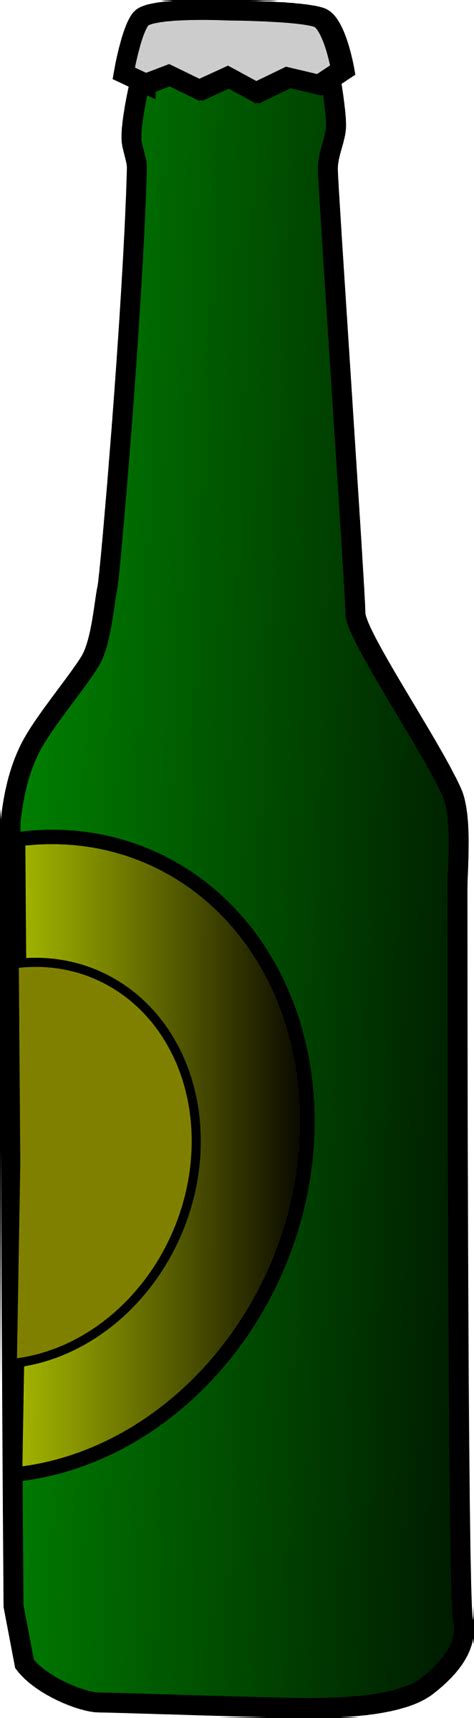 Beer Bottle Vector Icon Clip Art Library